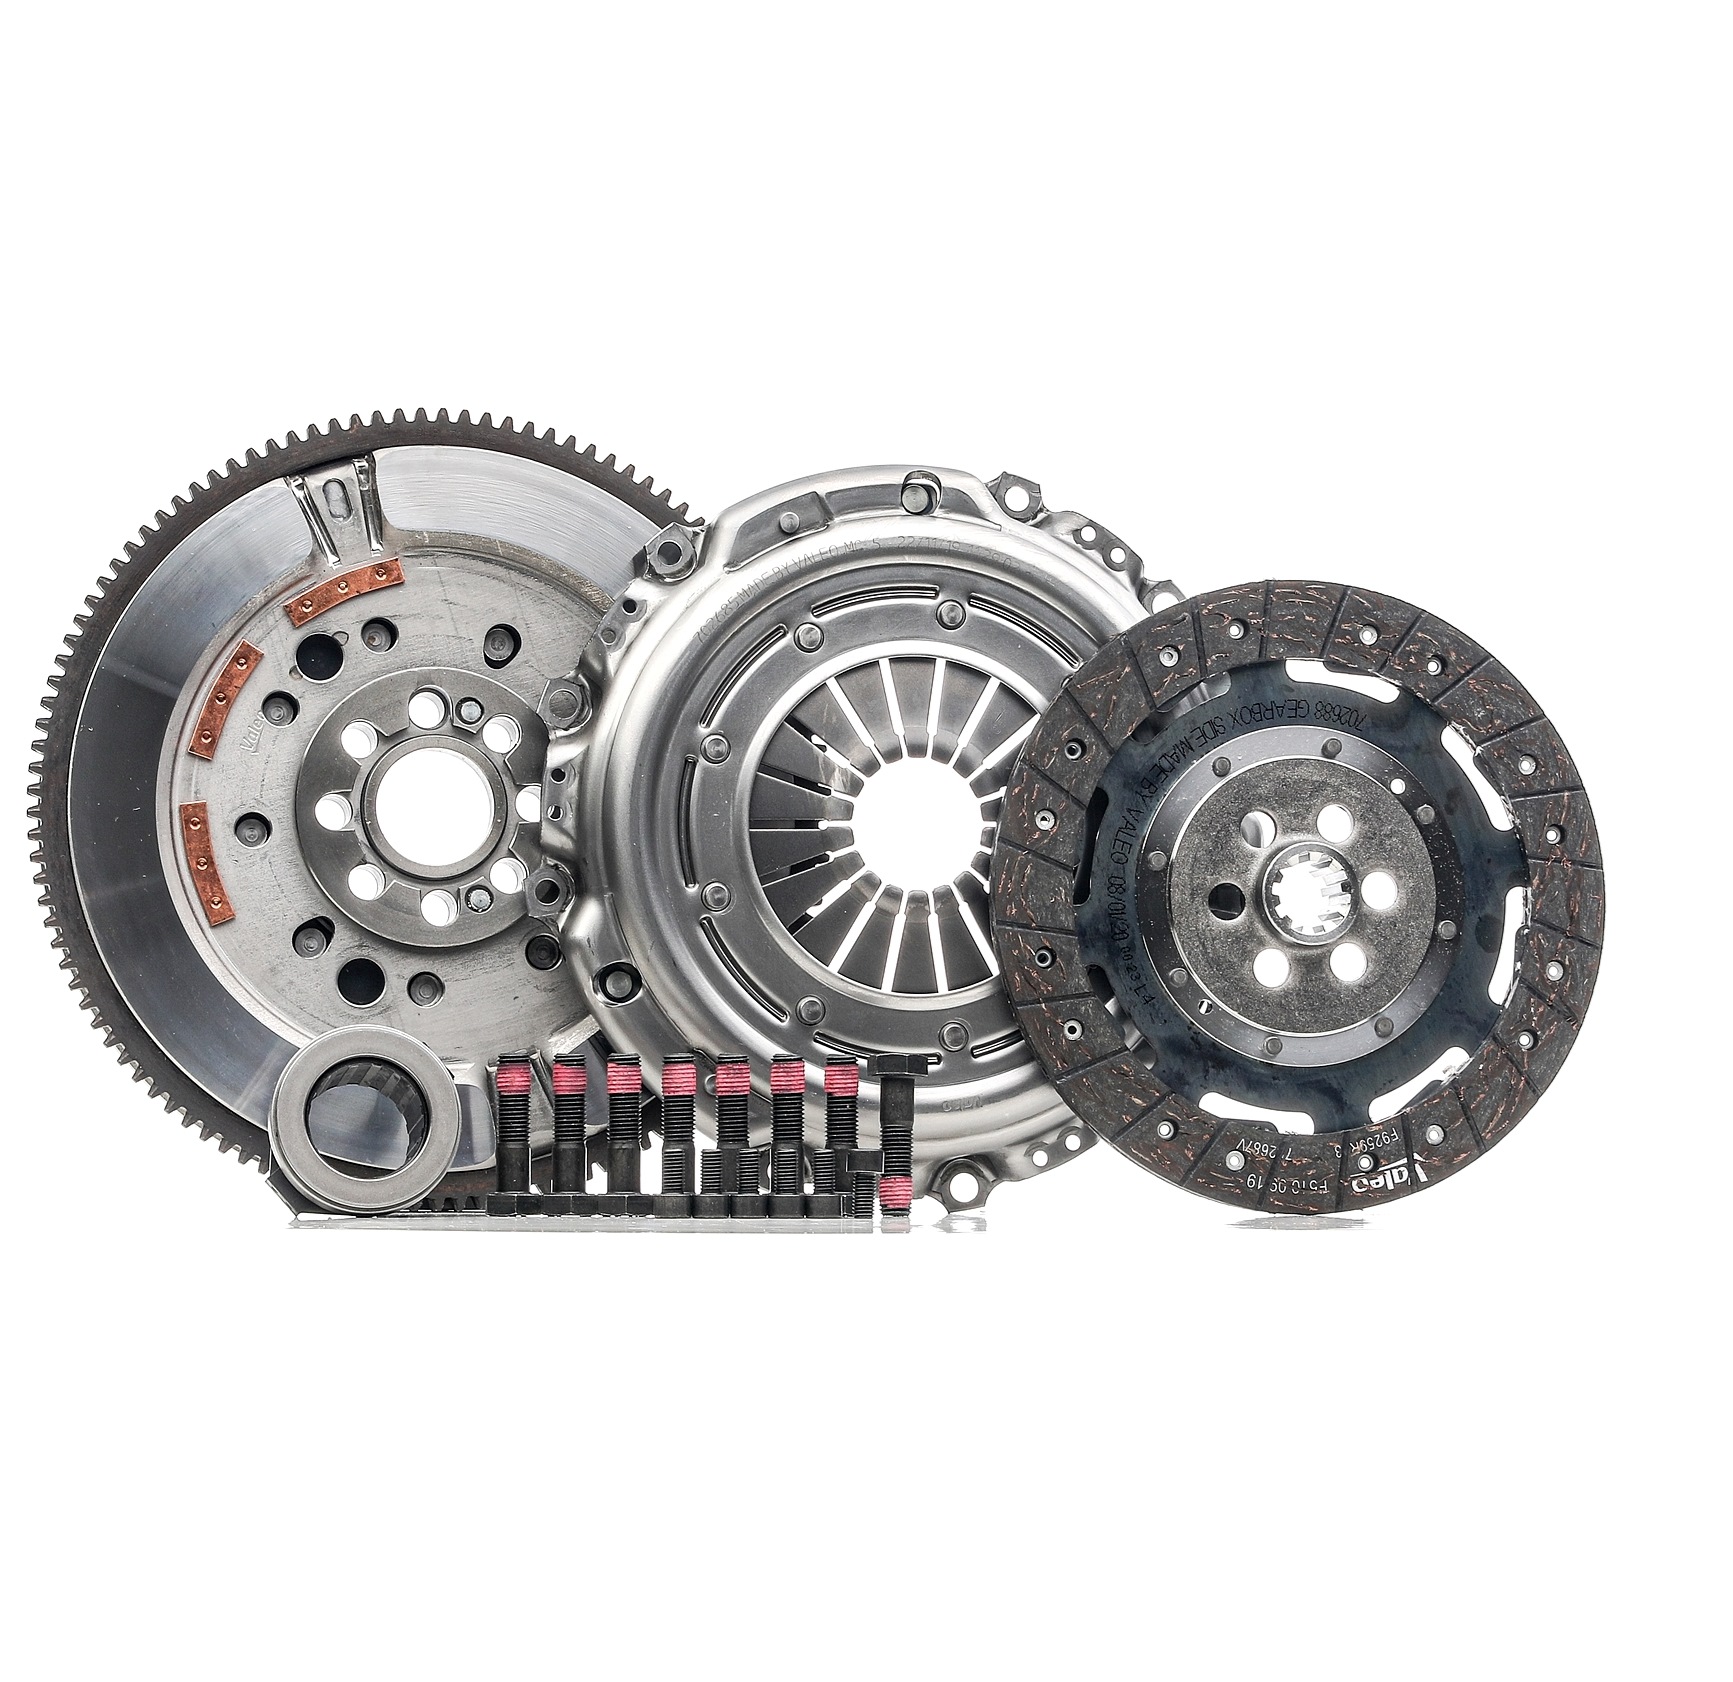 837049 VALEO Clutch set BMW with dual-mass flywheel, with clutch release bearing, 229mm